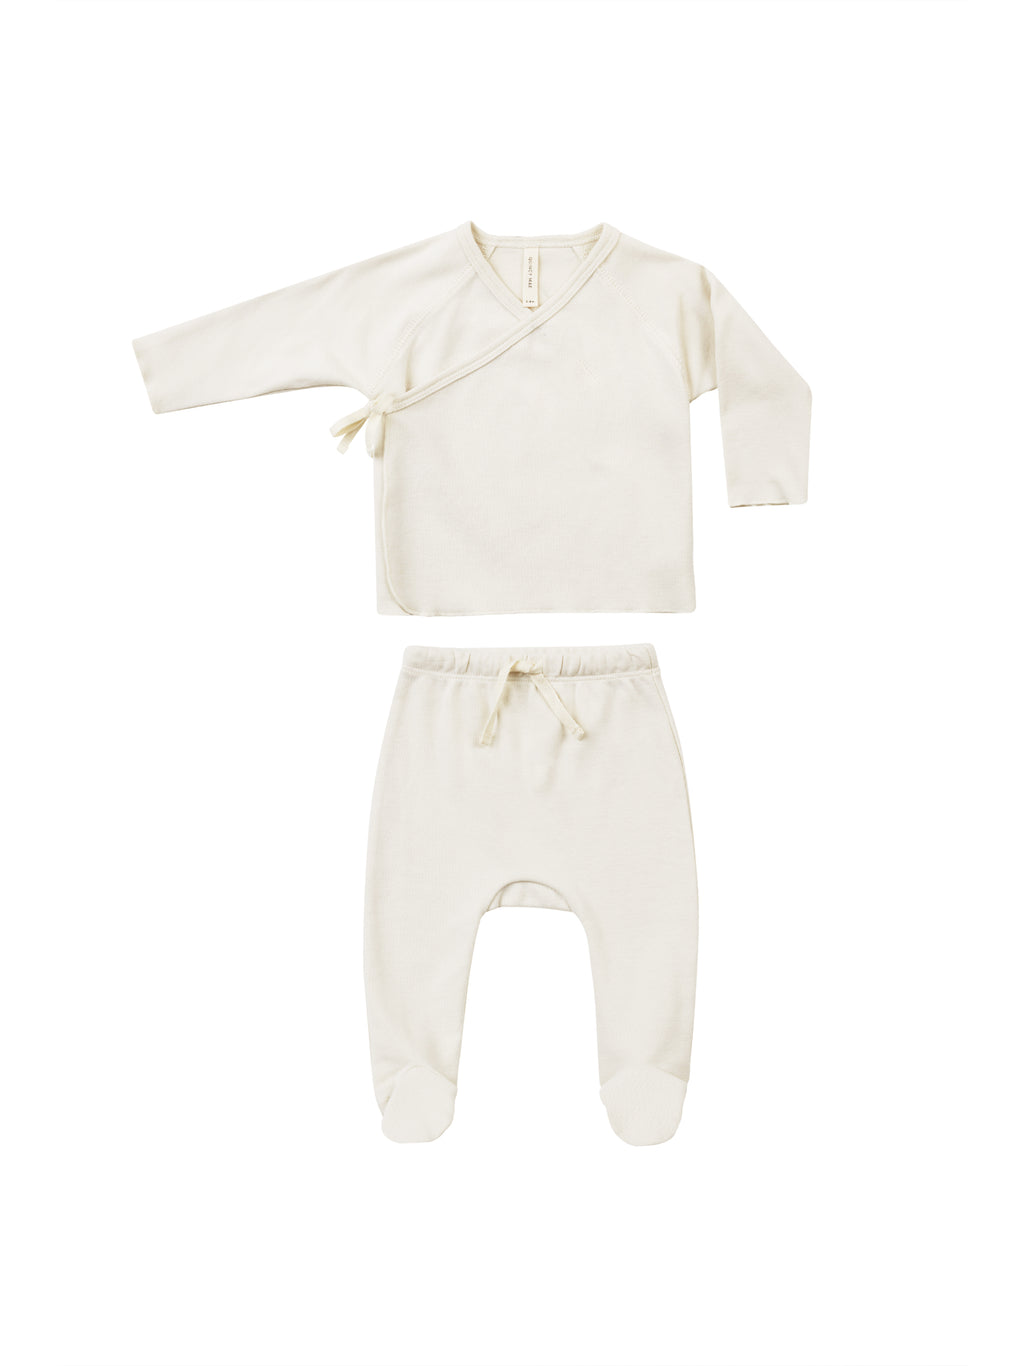 Quincy Mae Wrap Top + Footed Pant Set - Ivory